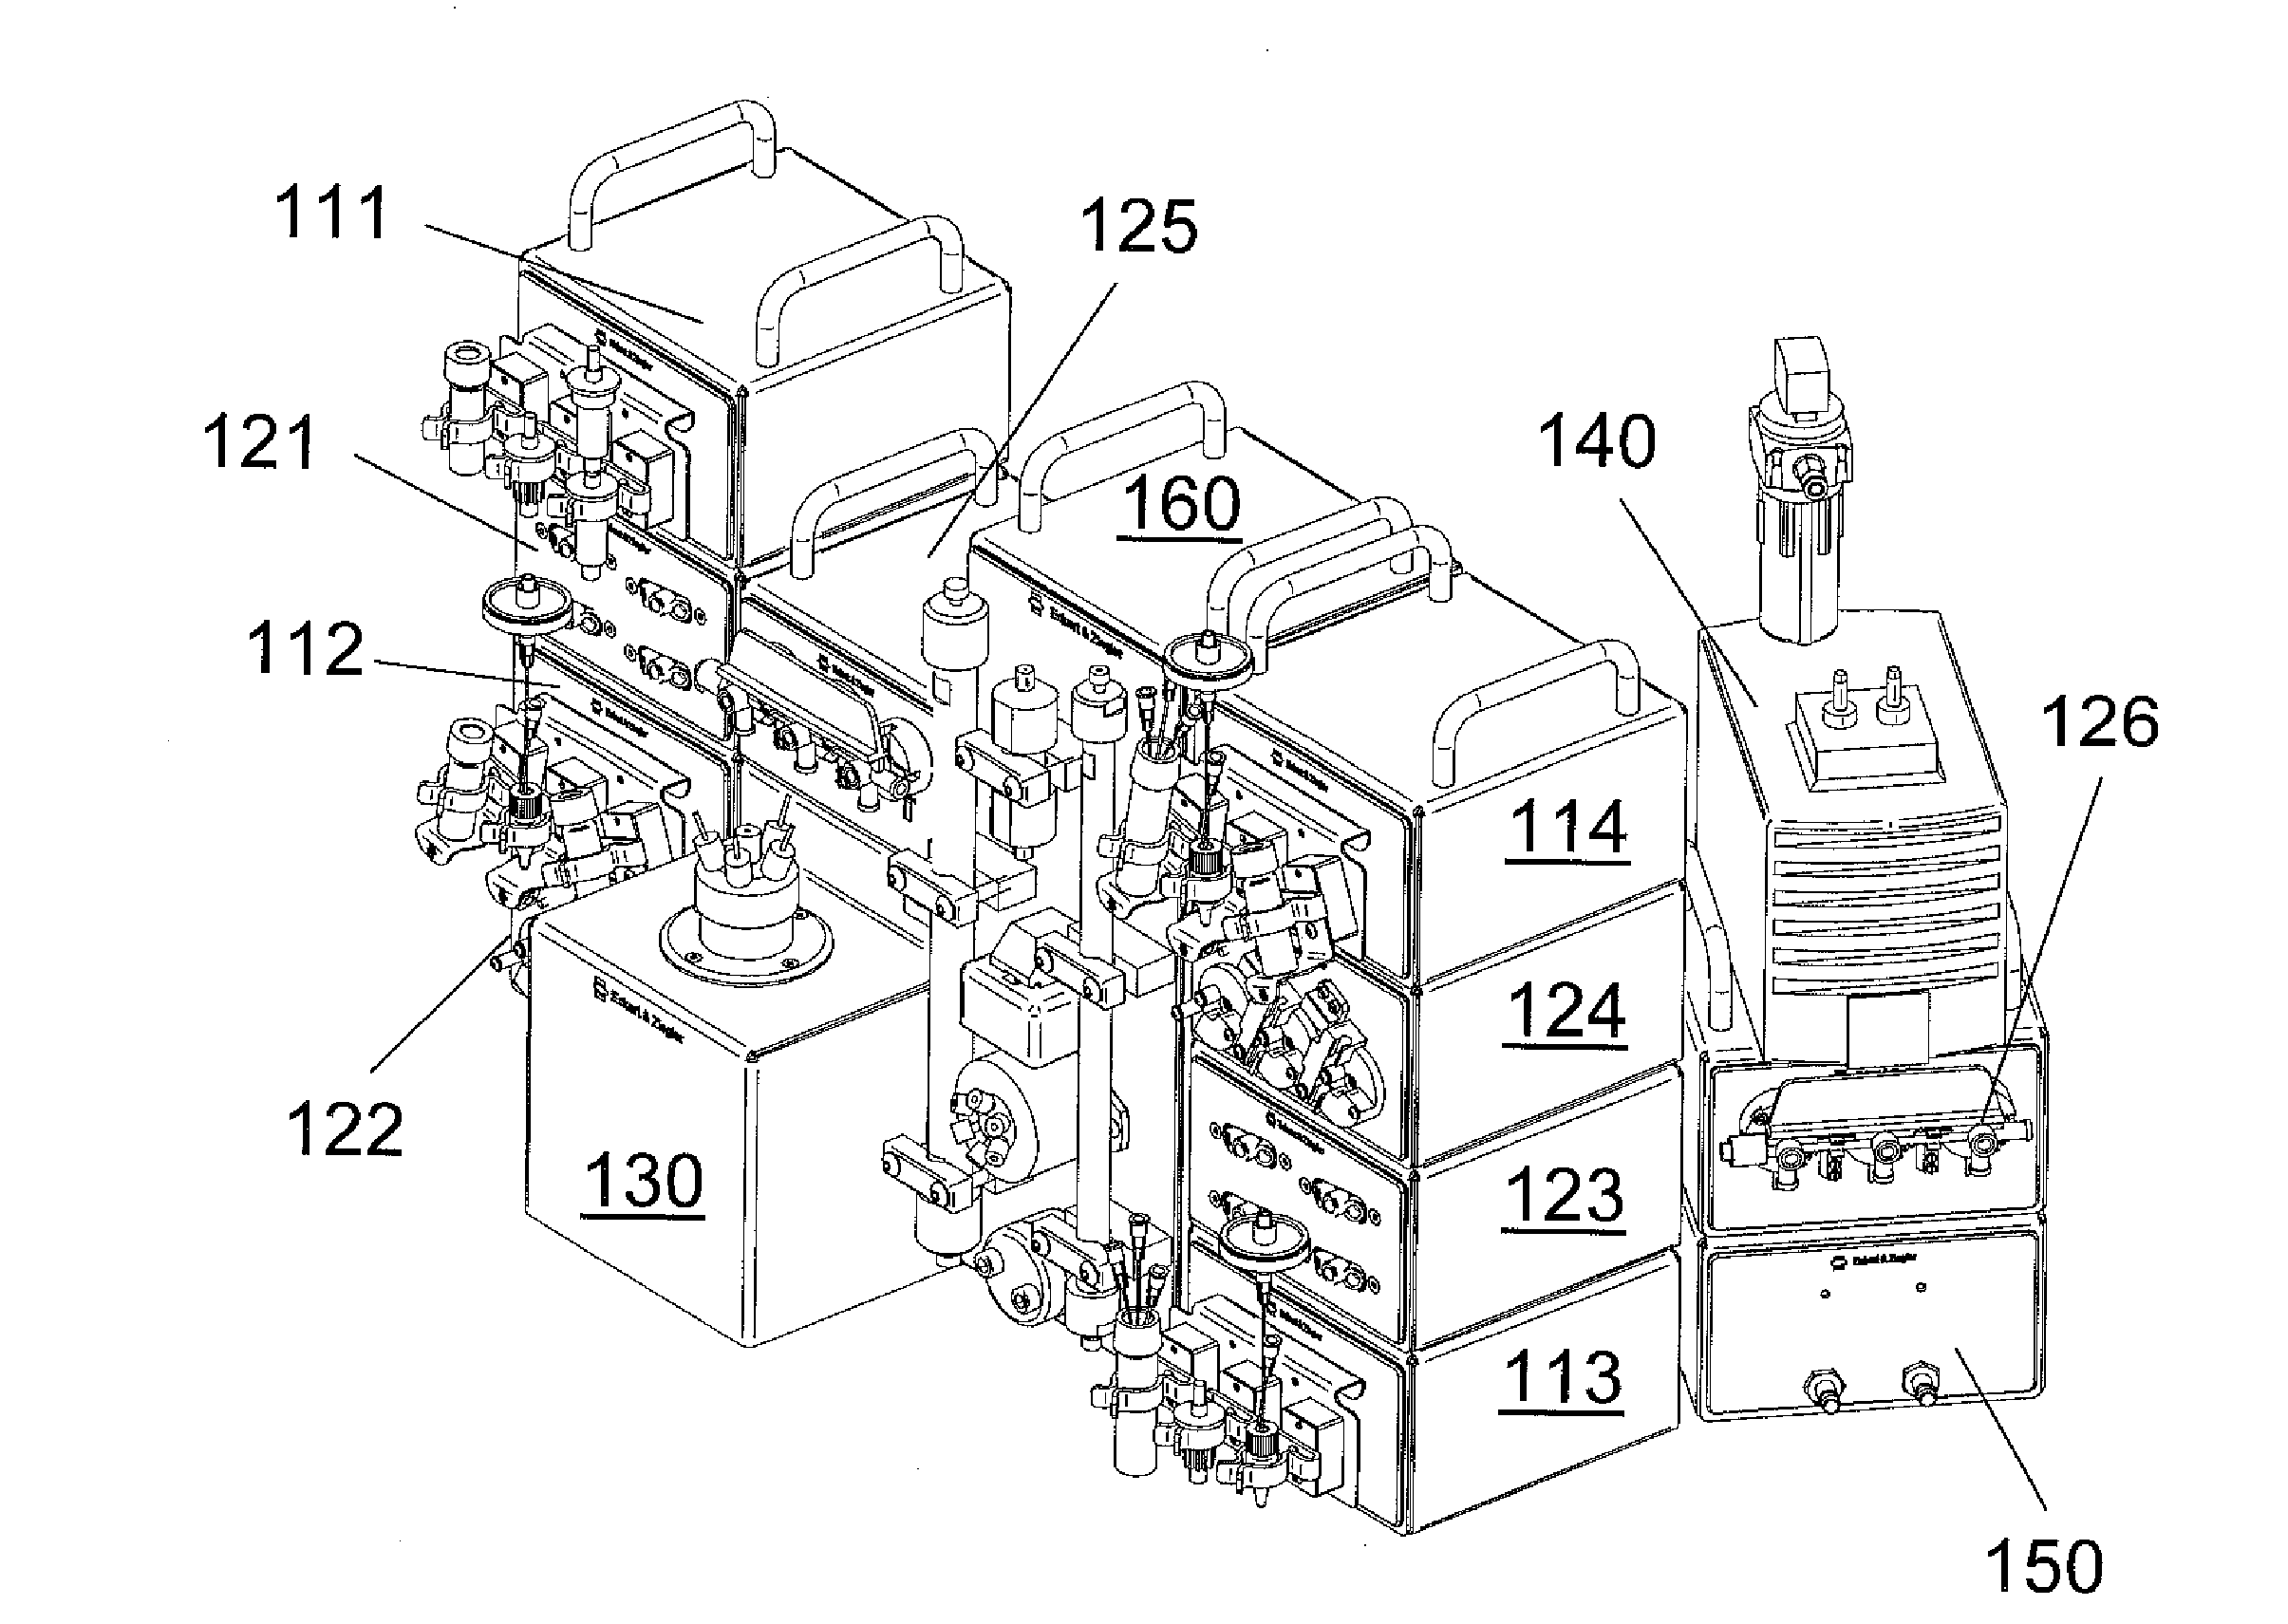 System and Method for Processing Chemical Substances, Computer Program for Controlling Such System, and a Corresponding Computer-Readable Storage Medium